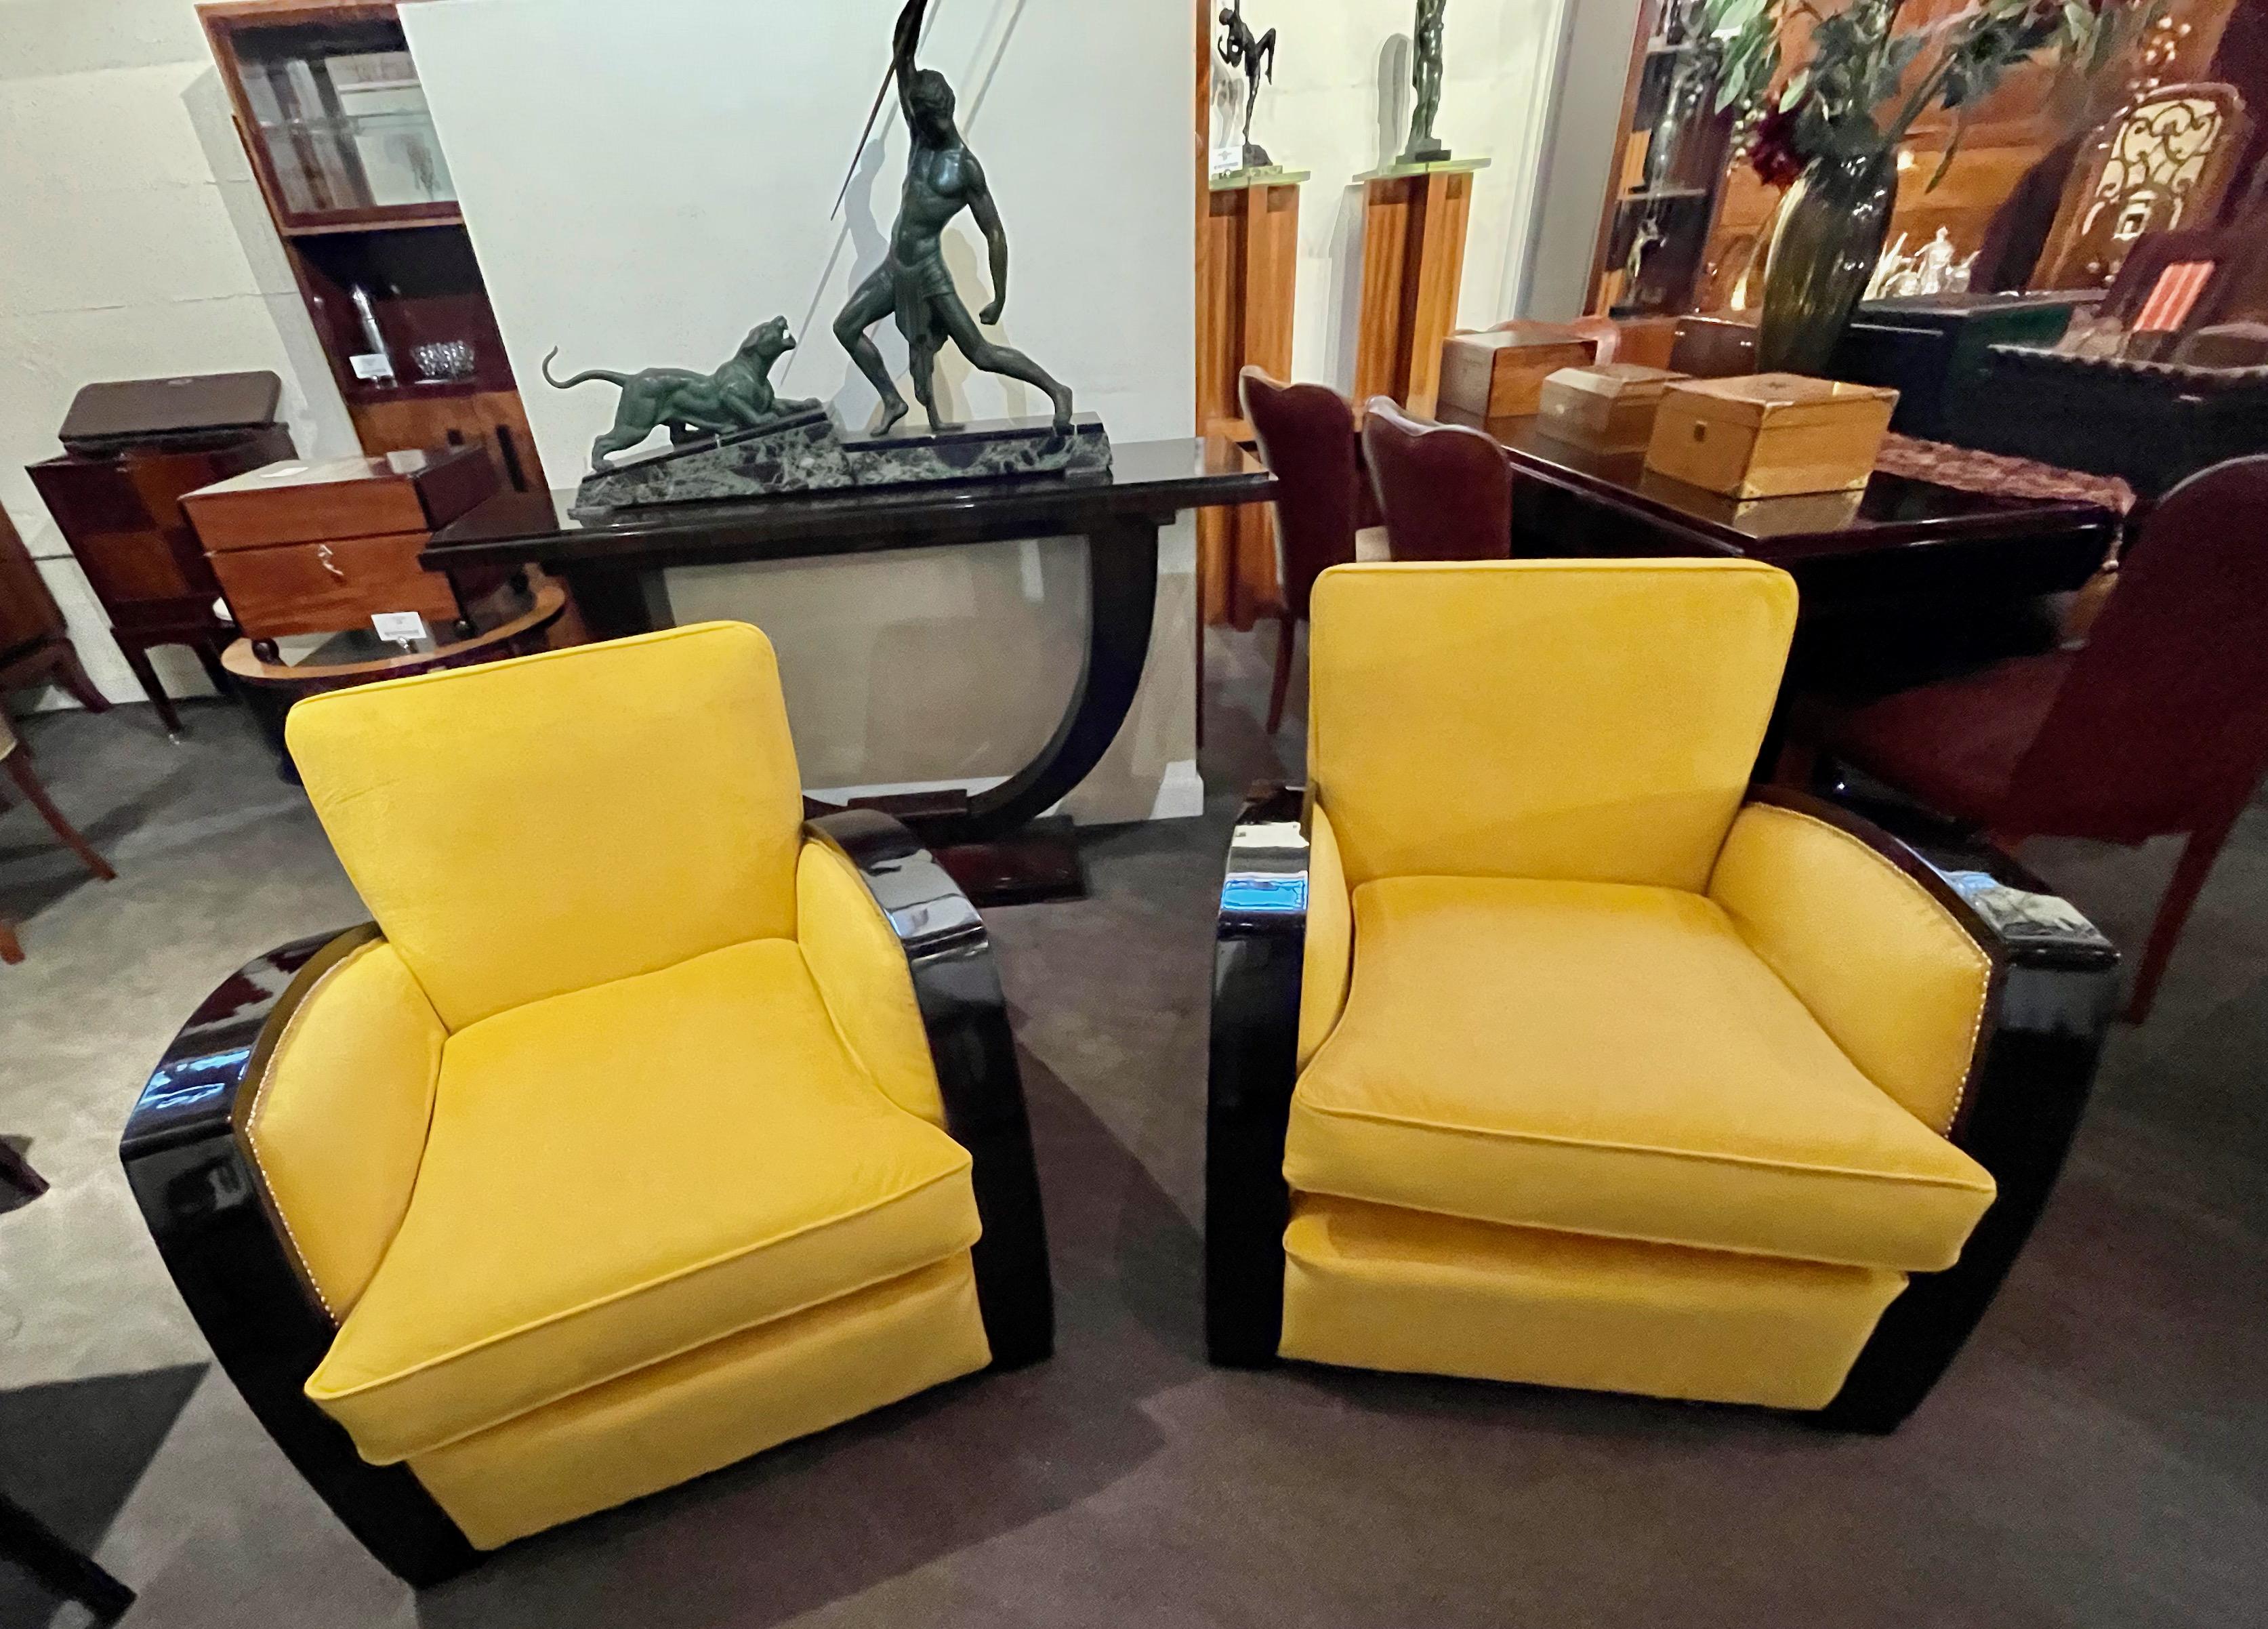 Art Deco Club chairs French style, newly restored in excellent condition ready to deliver. Many nice details including refinished wood, French-style nails, and a soft cotton velvet which would be comfortable and useful in any setting. The